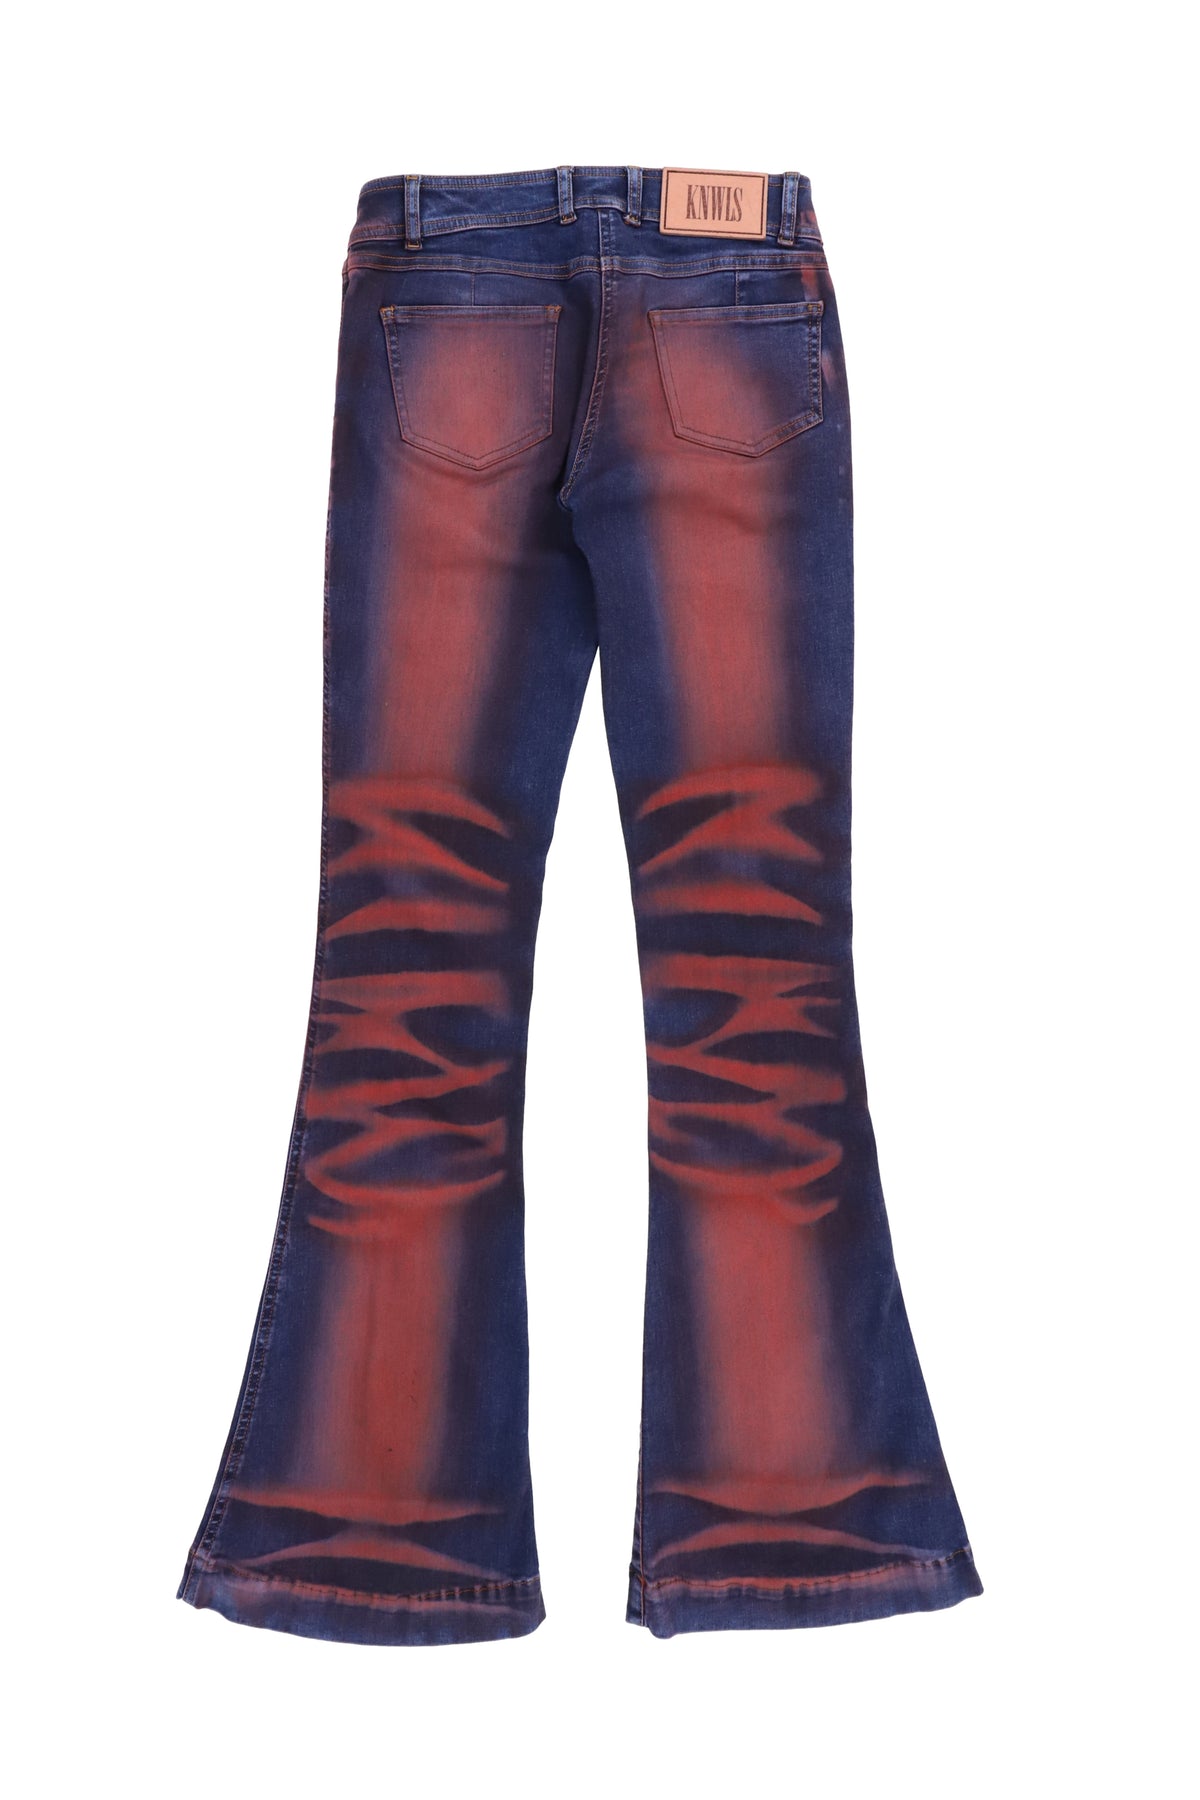 HARLEY JEANS / CREASE RED